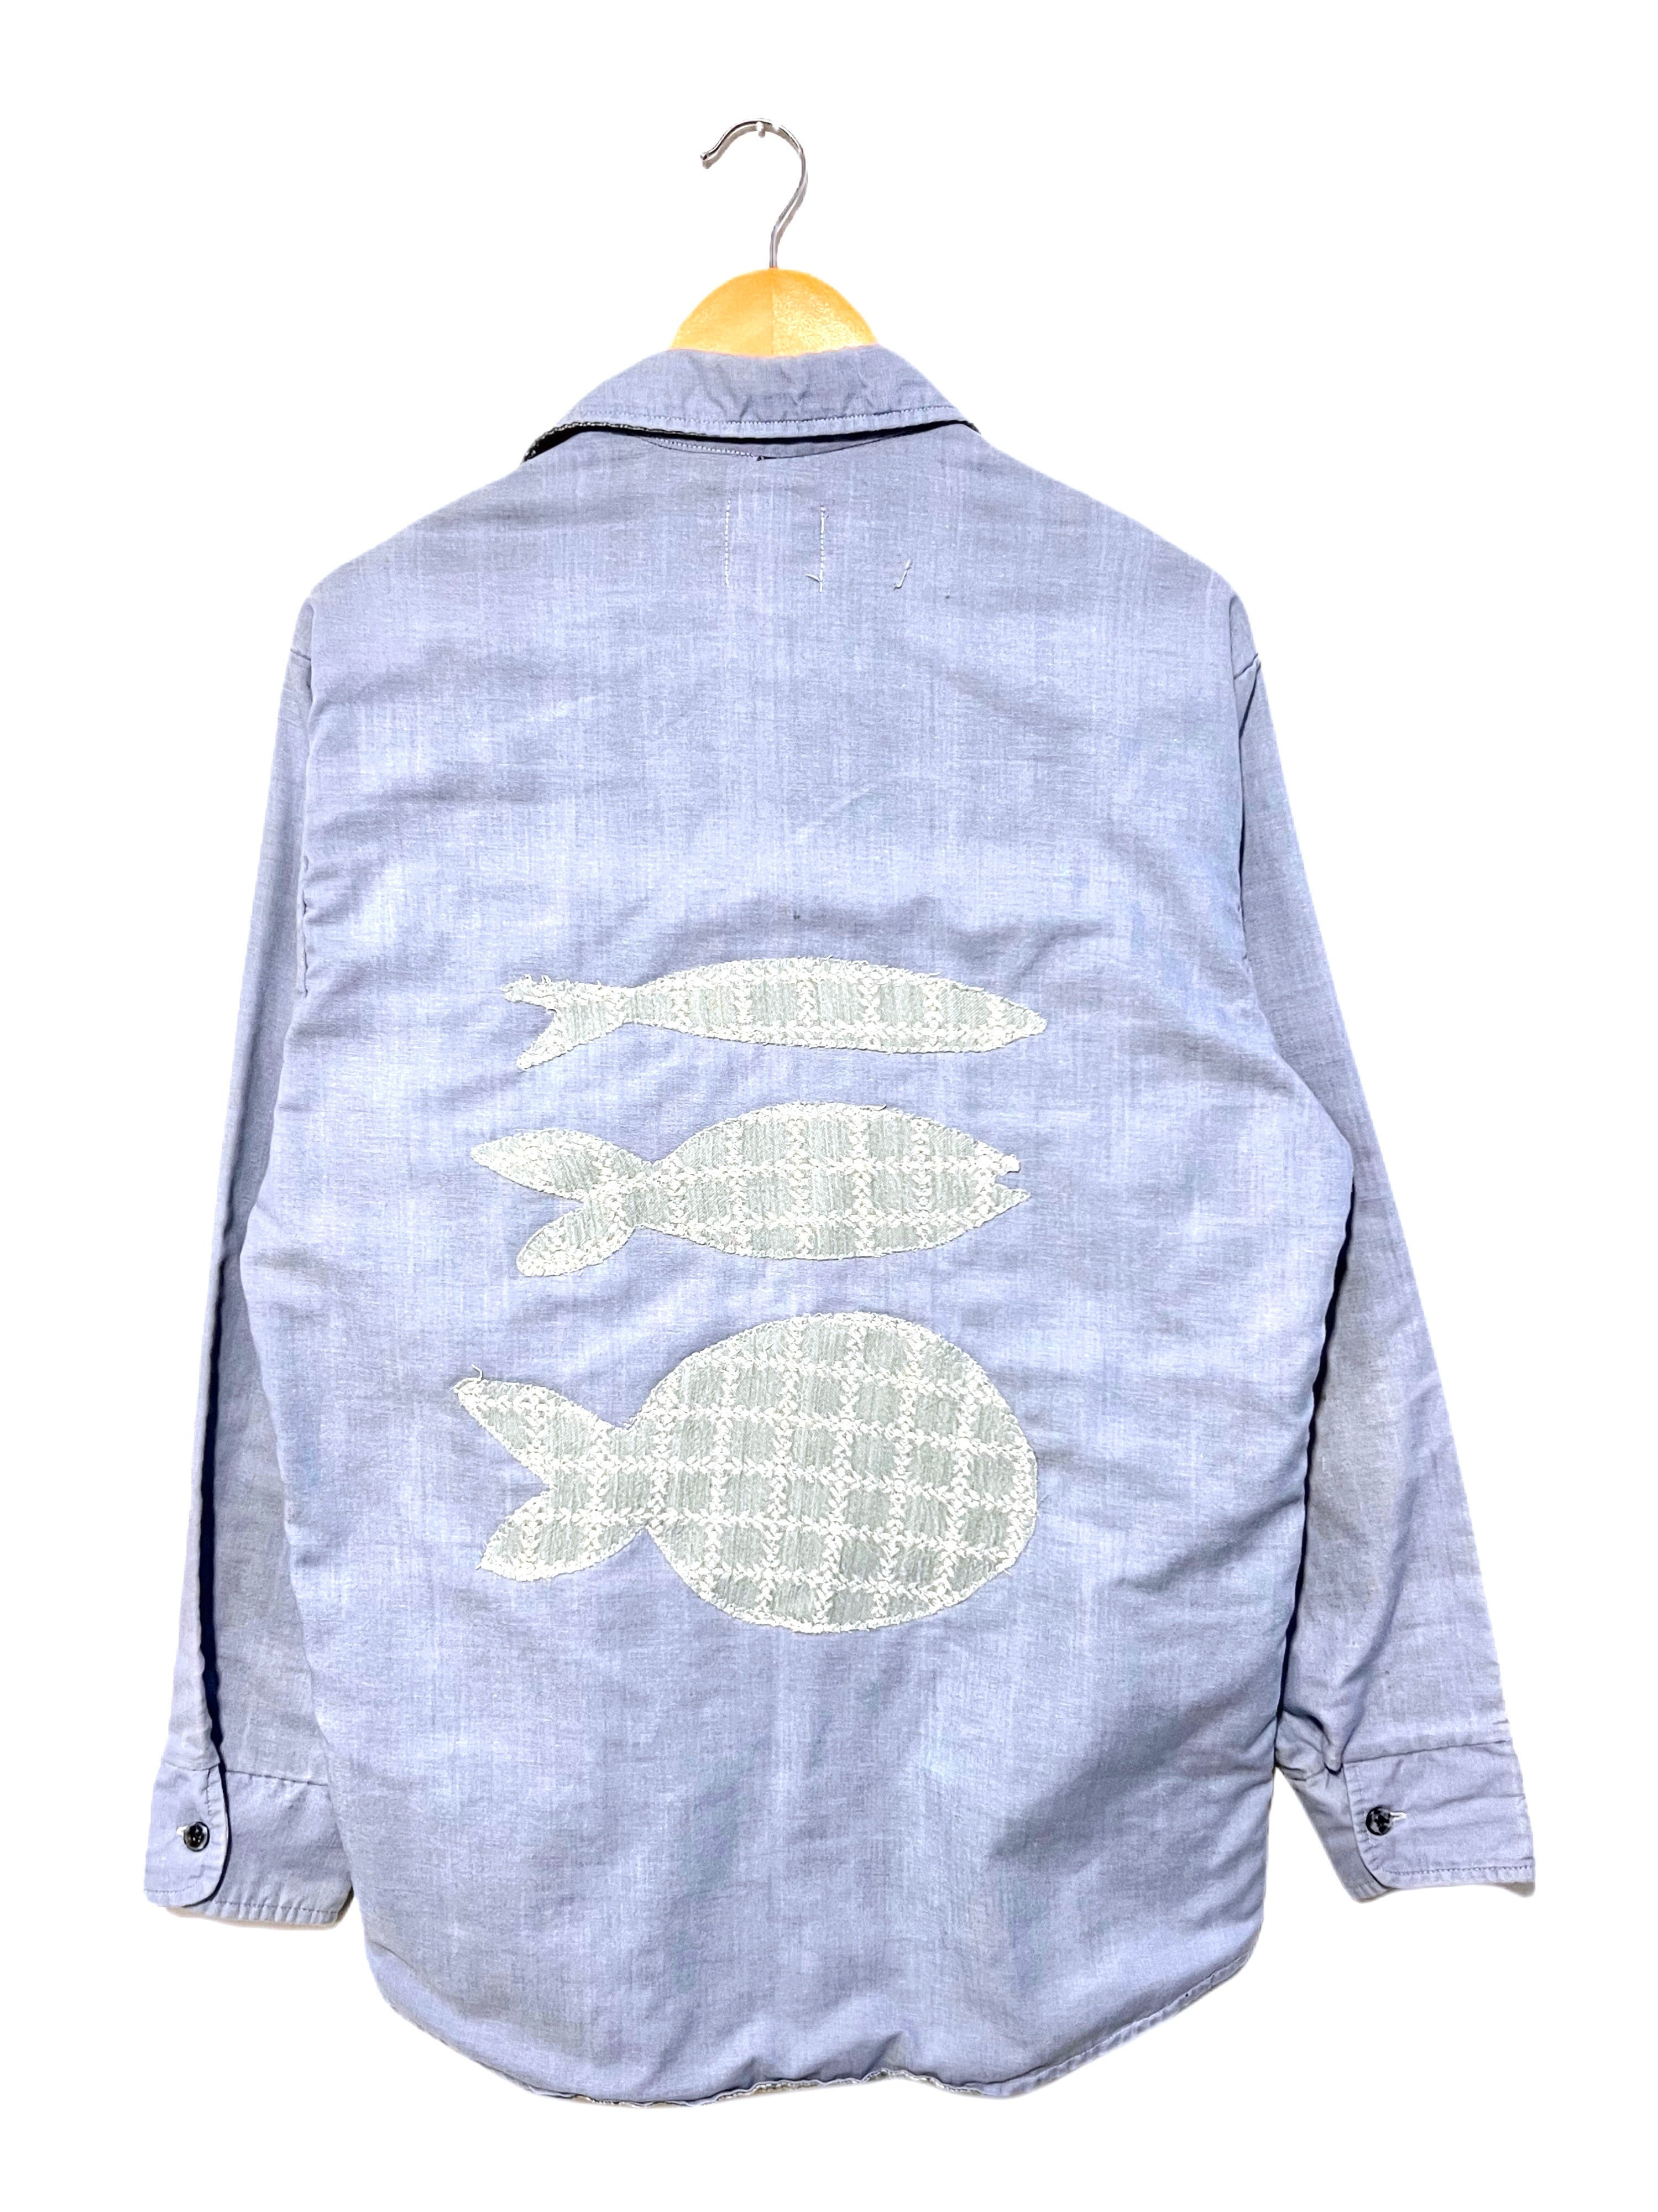 3FISH RECLAIMED BUTTON UP